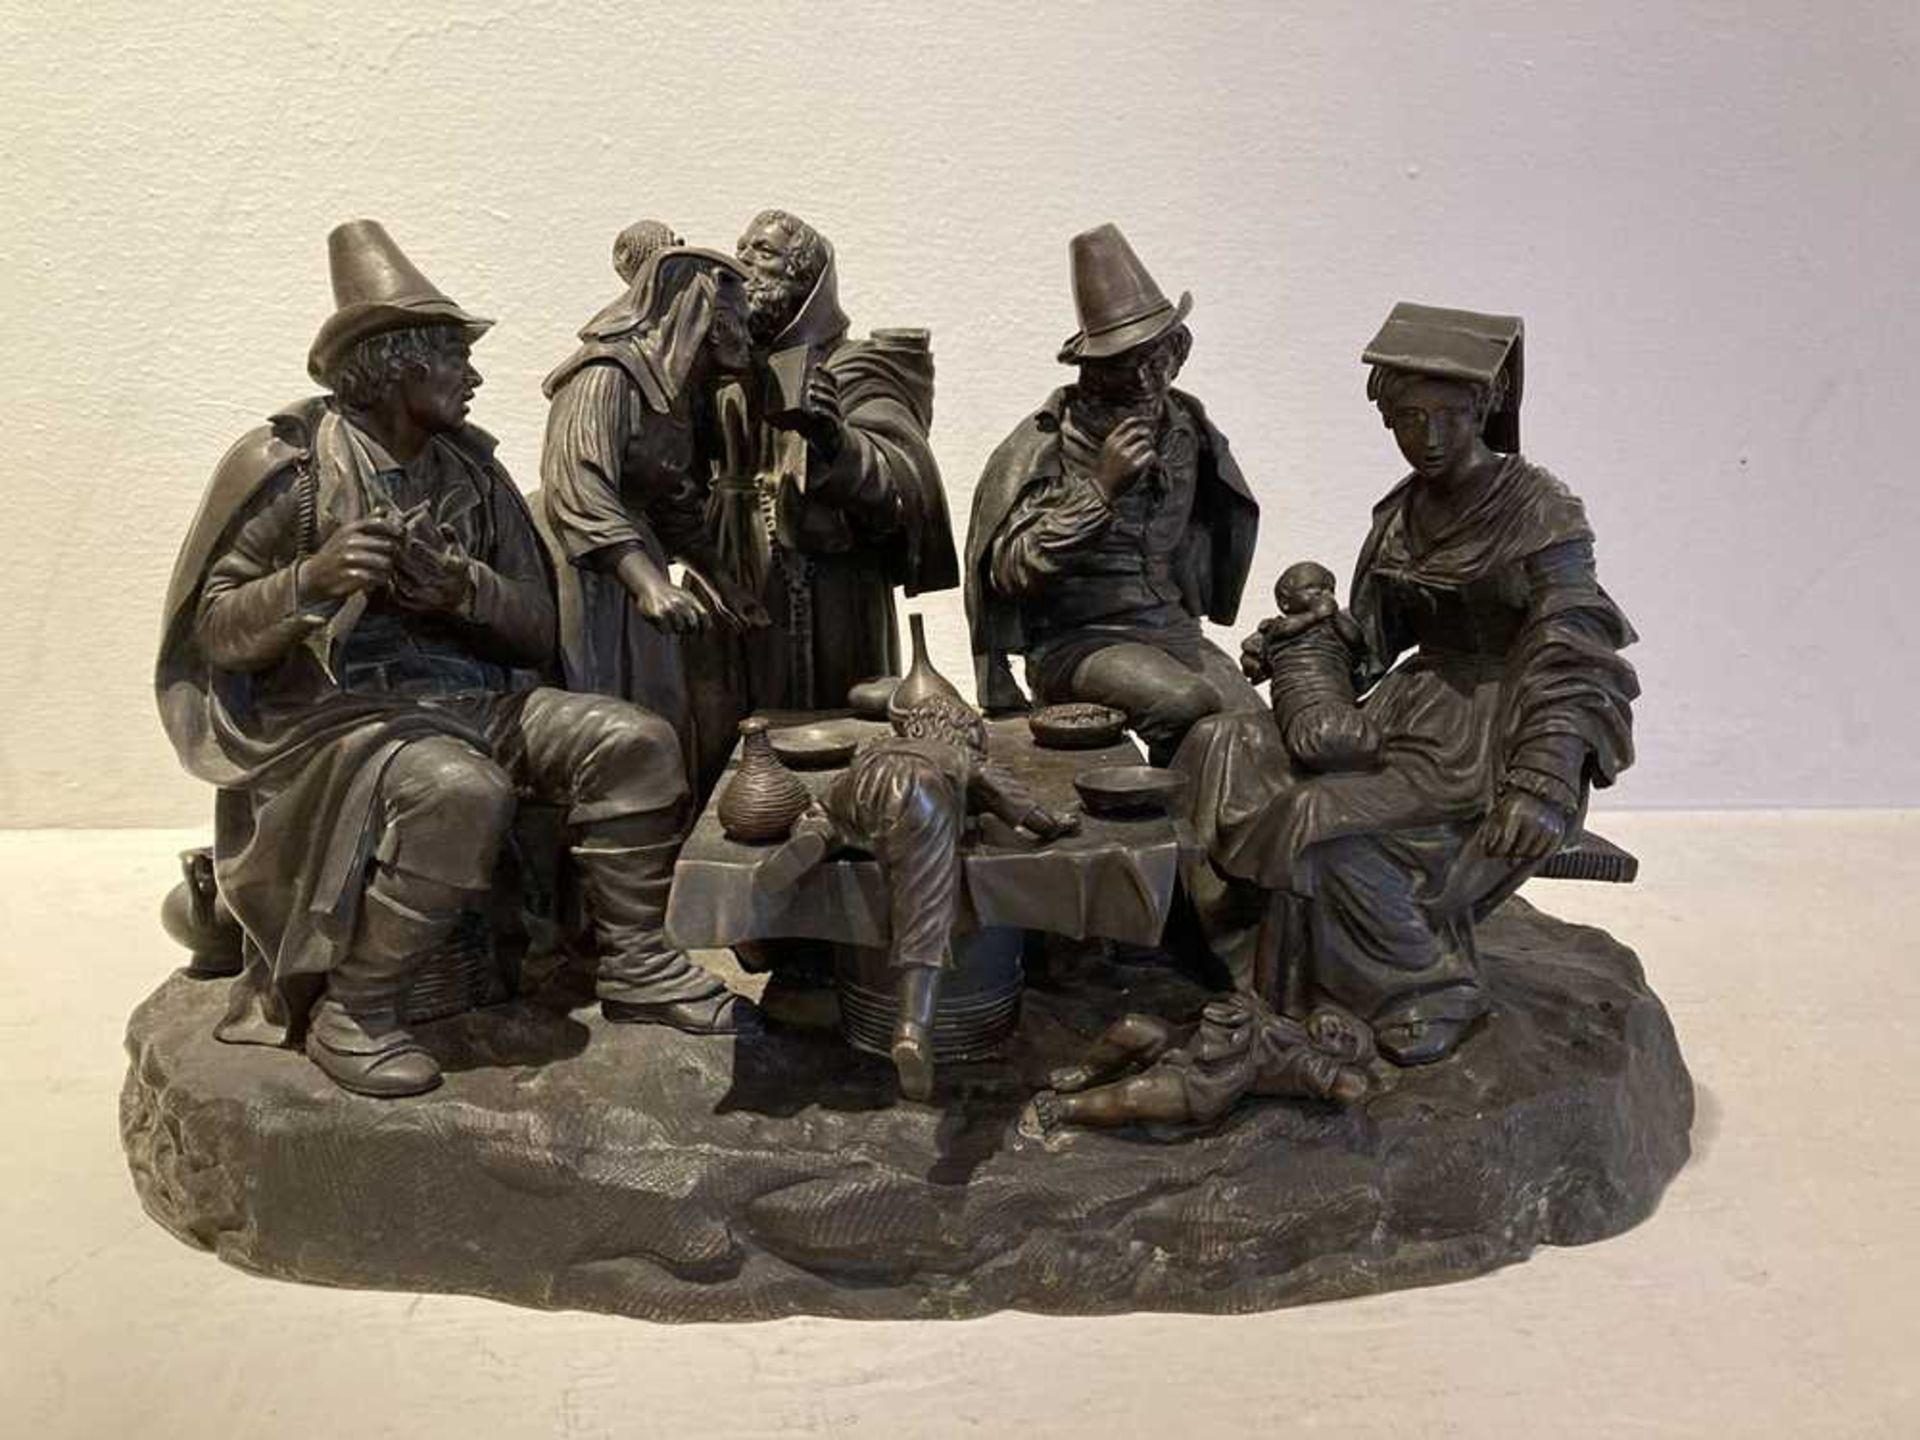 A LARGE CONTINENTAL BRONZE GENRE SCENE FIGURE GROUP 19TH CENTURY - Image 27 of 27